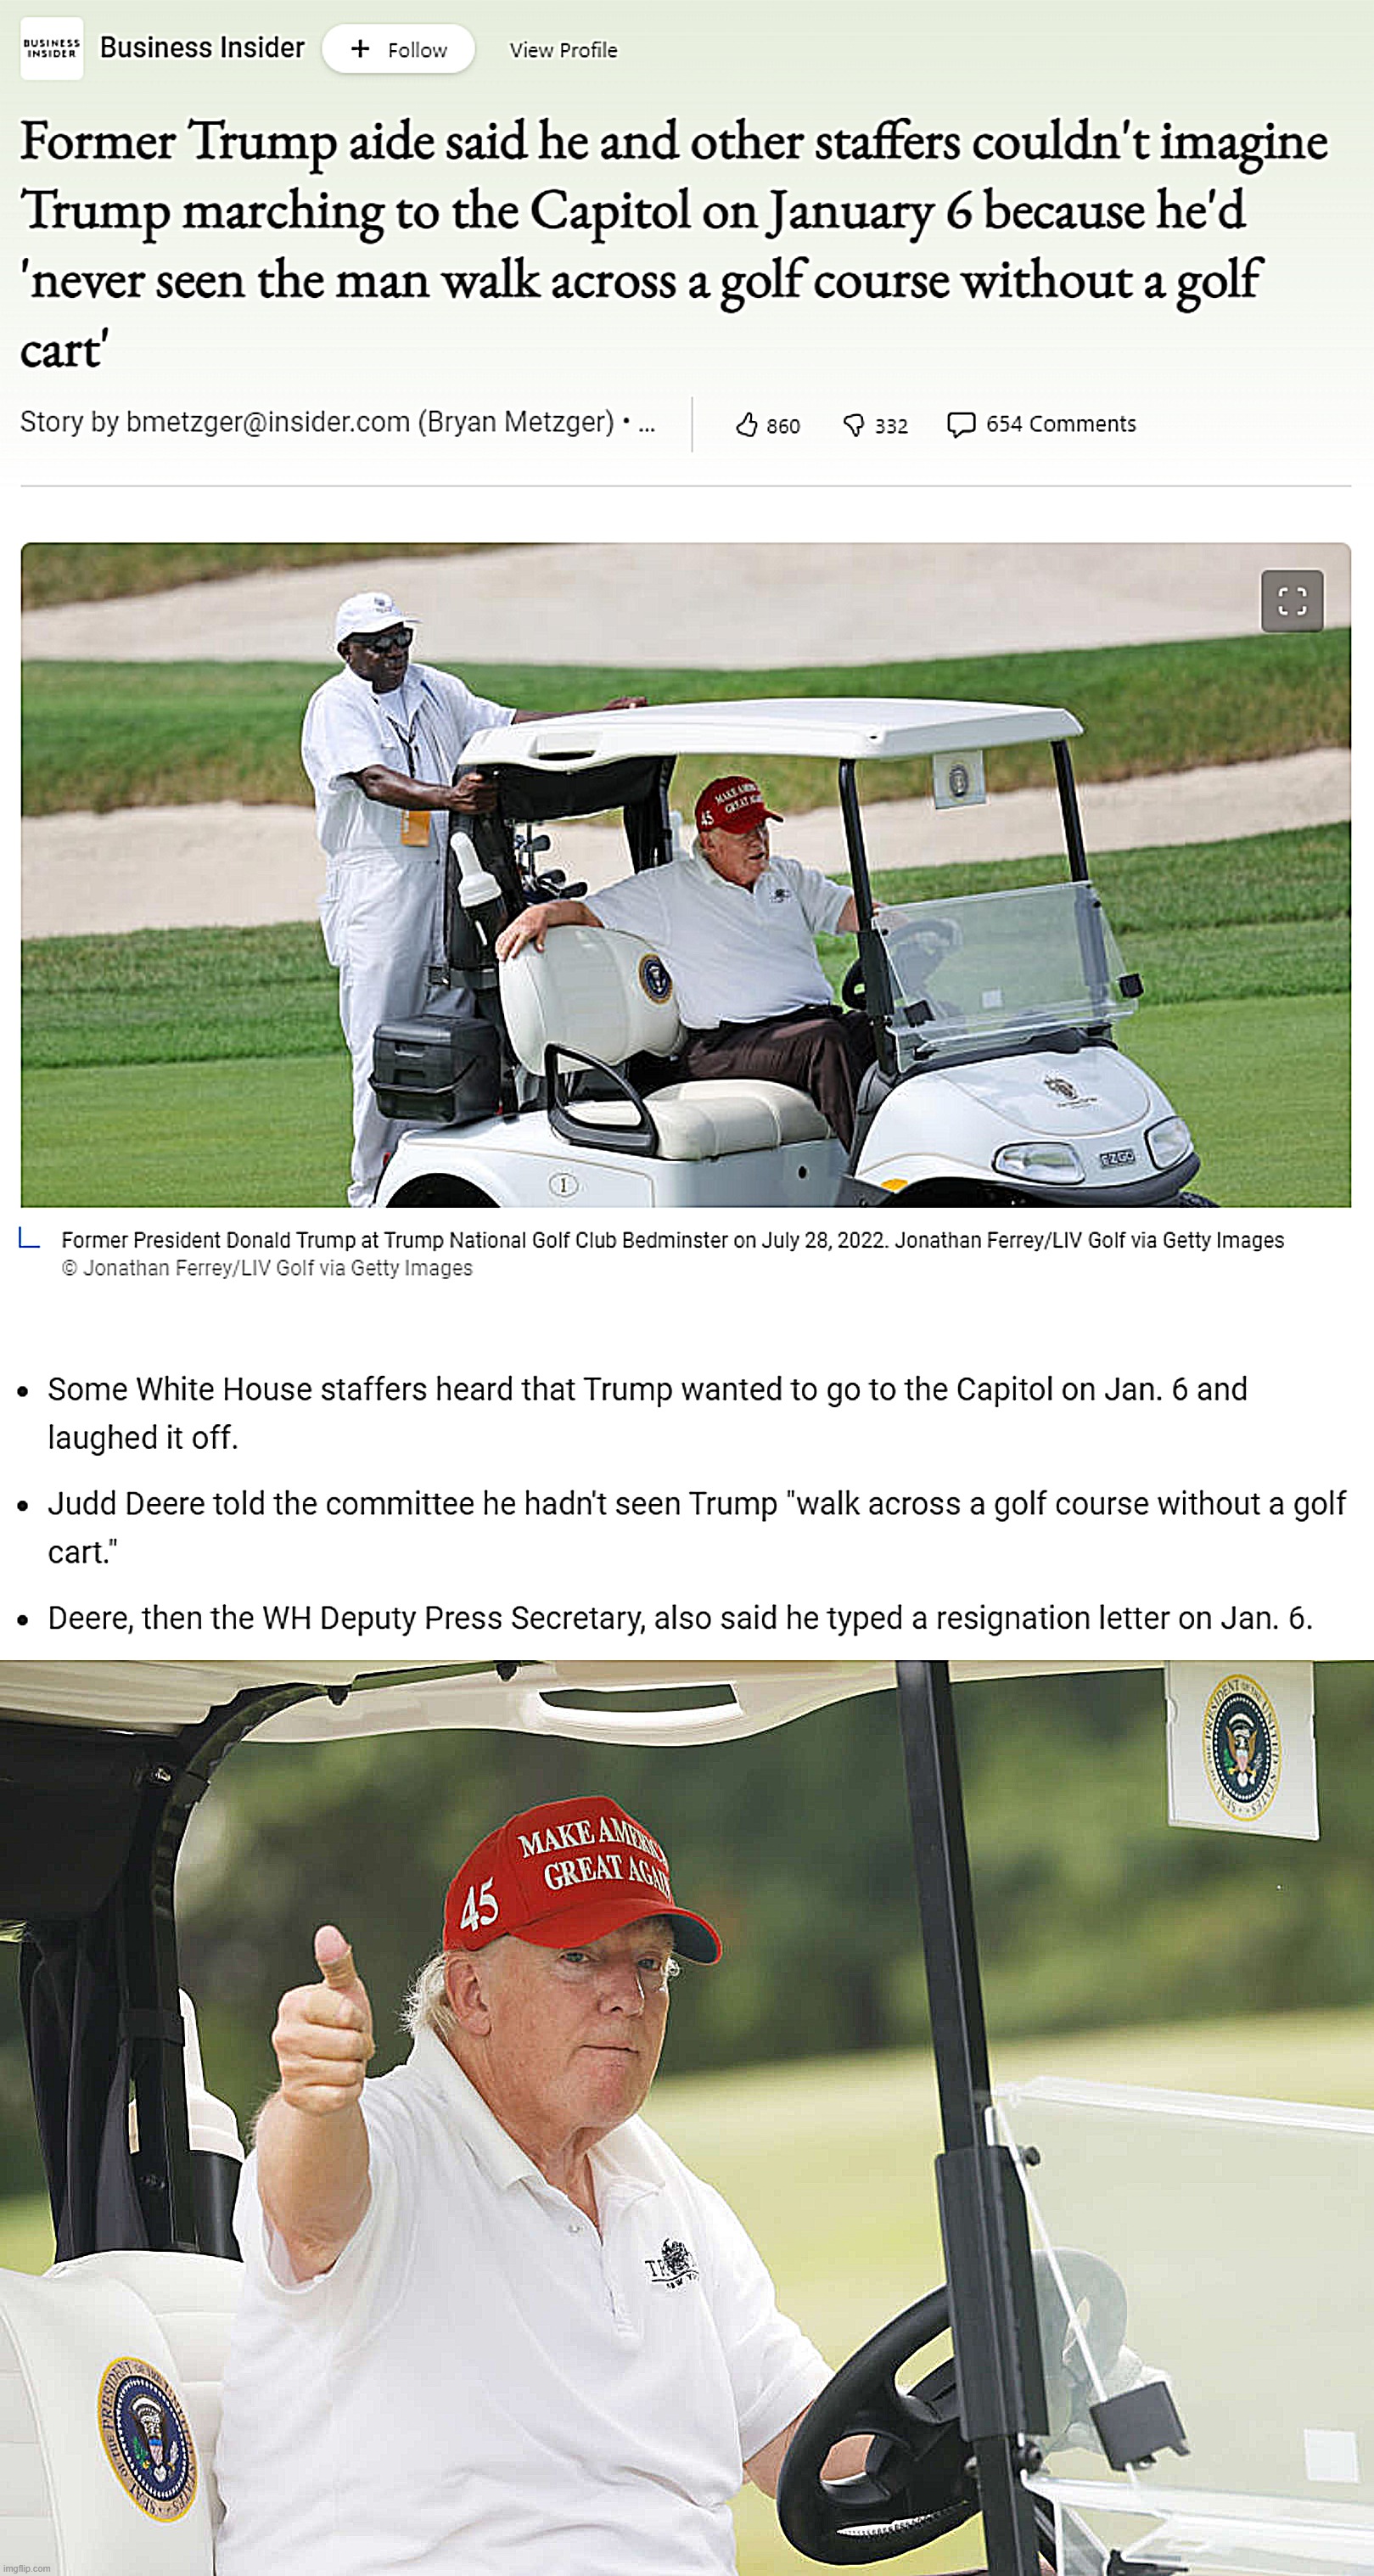 ROTFL. Now that's some vintage internet lingo I haven't used in a long time | image tagged in fatass trump on a golf cart,old donald trump thumbs up | made w/ Imgflip meme maker